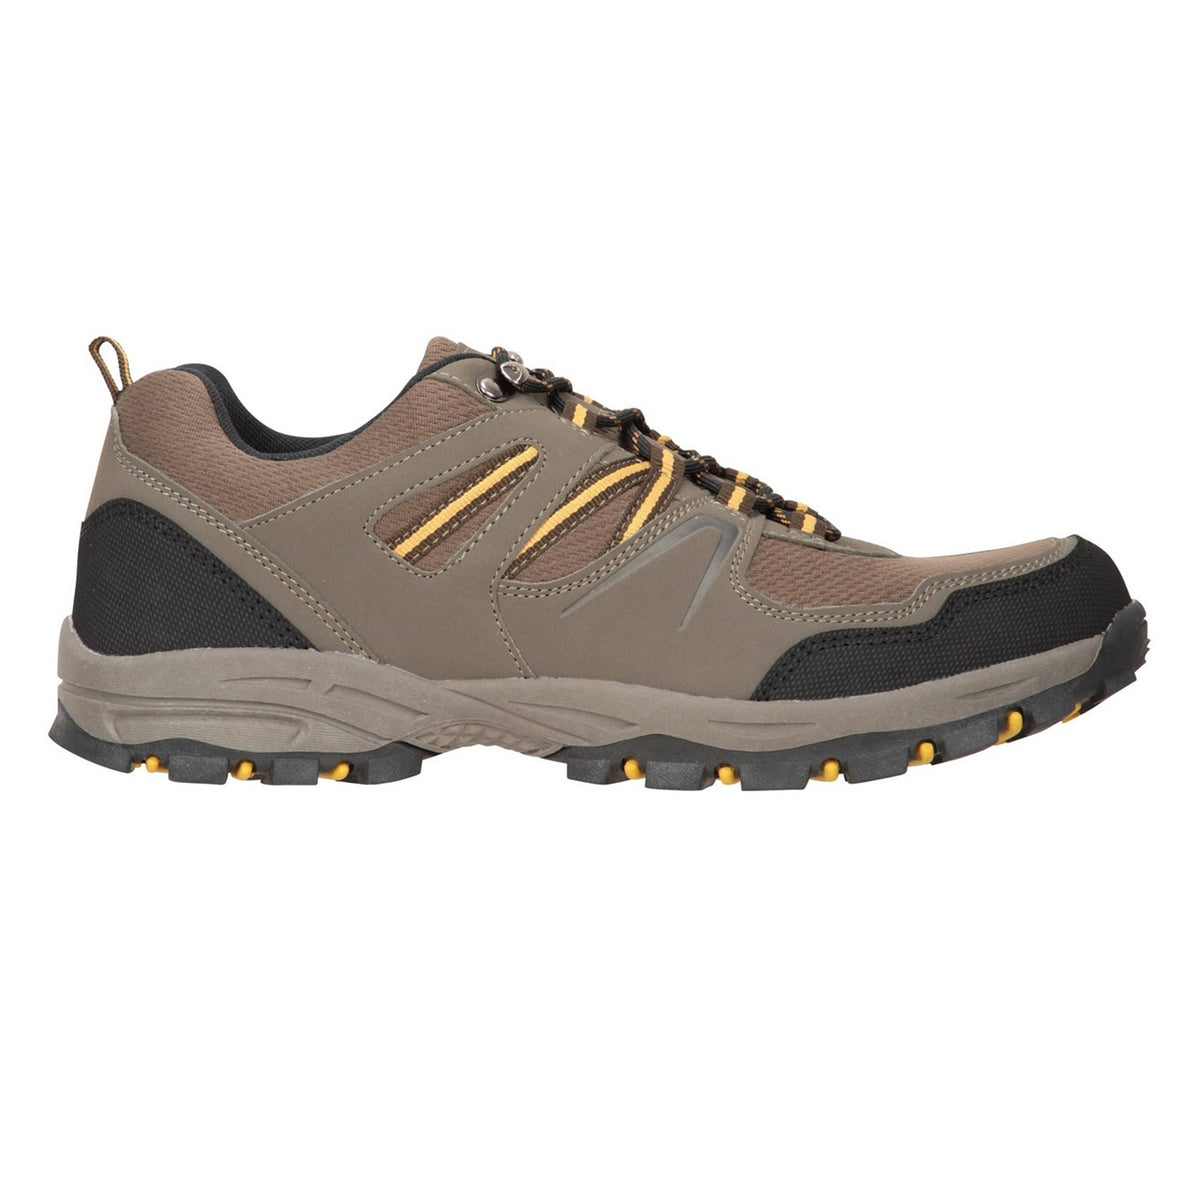 Mountain Warehouse Mens Mcleod Wide Walking Shoes | Discounts on great ...